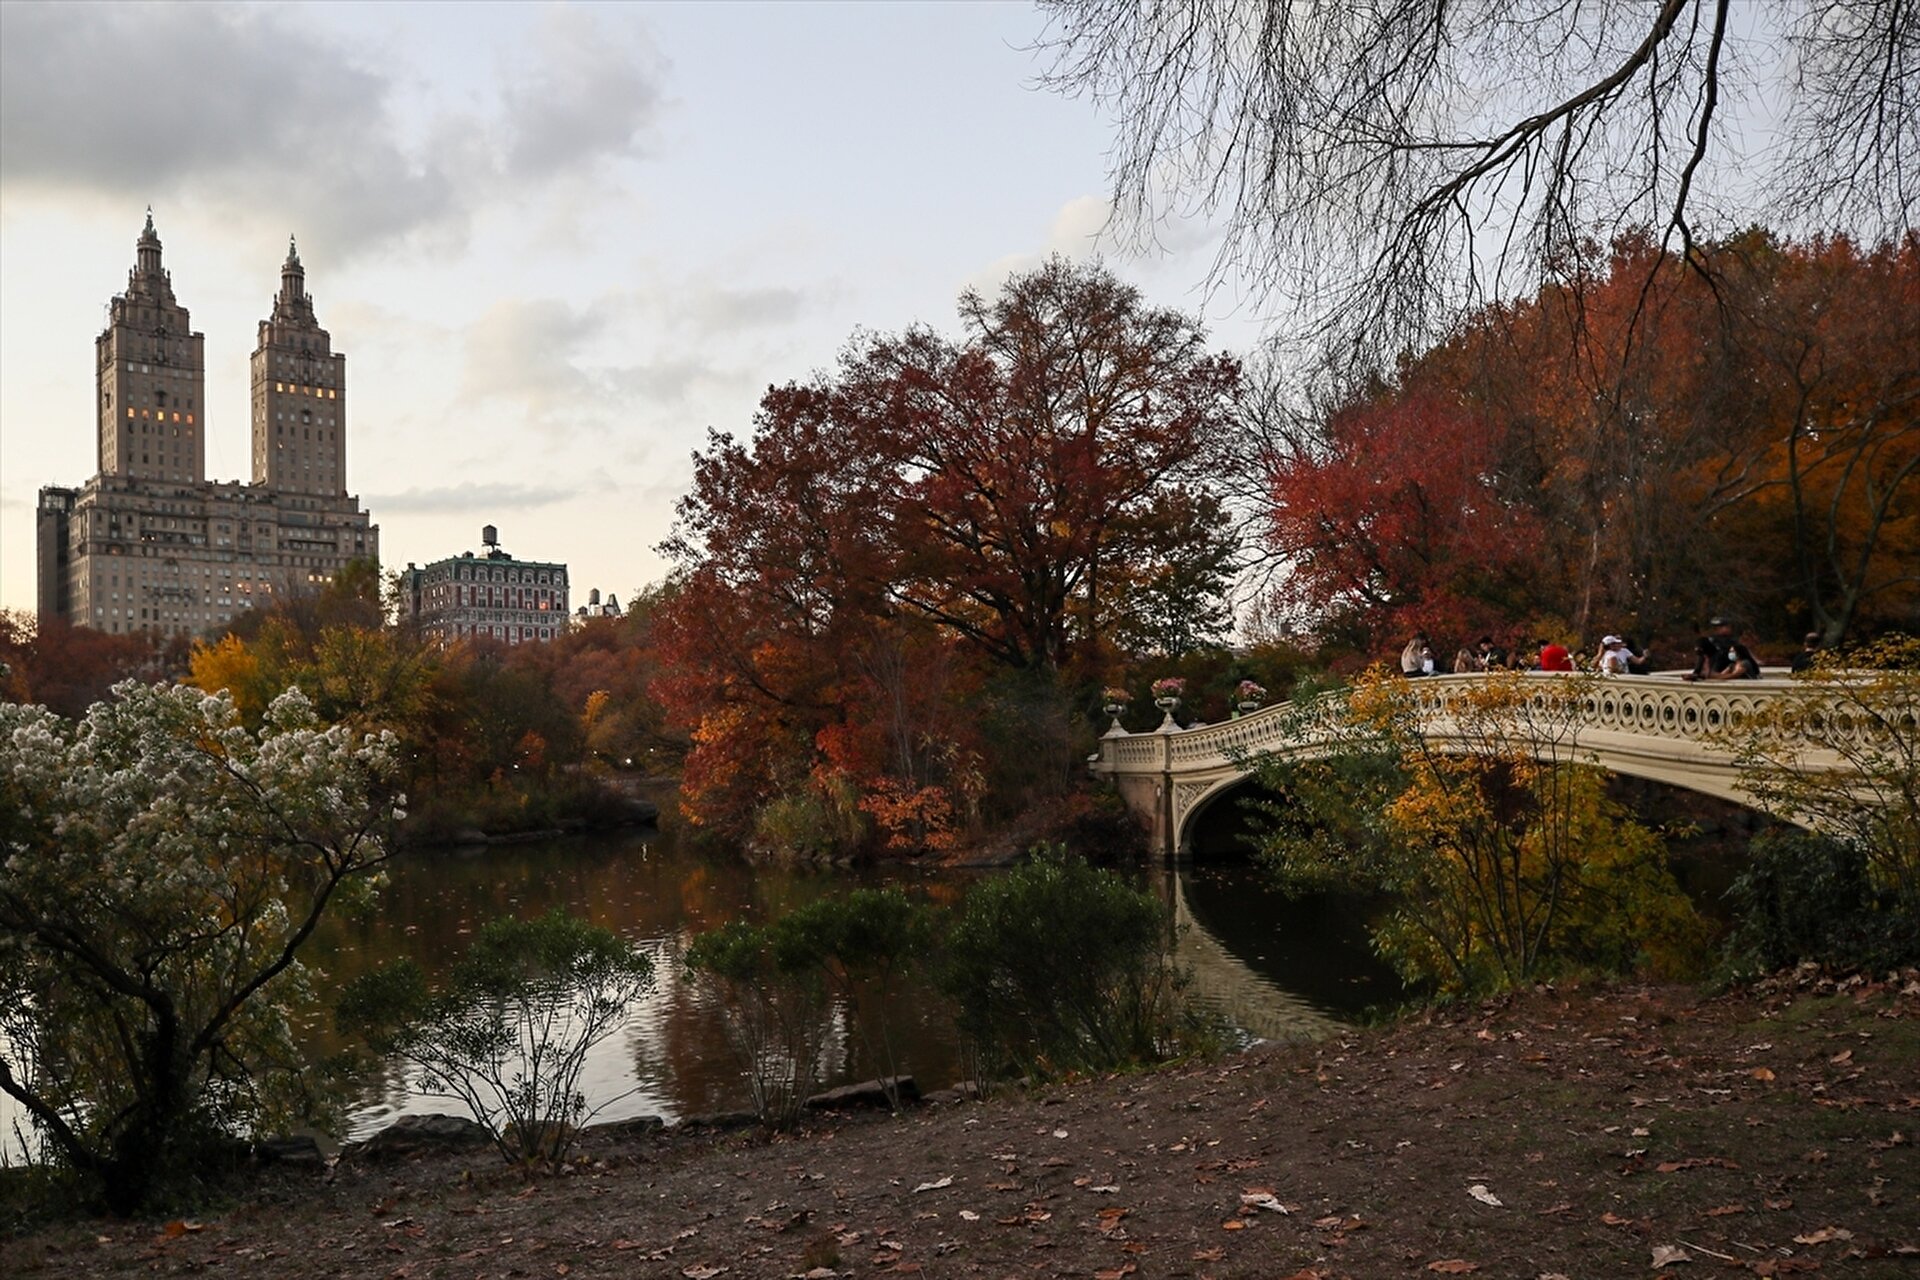 People enjoy autumn foliage at the Central Park in New York City